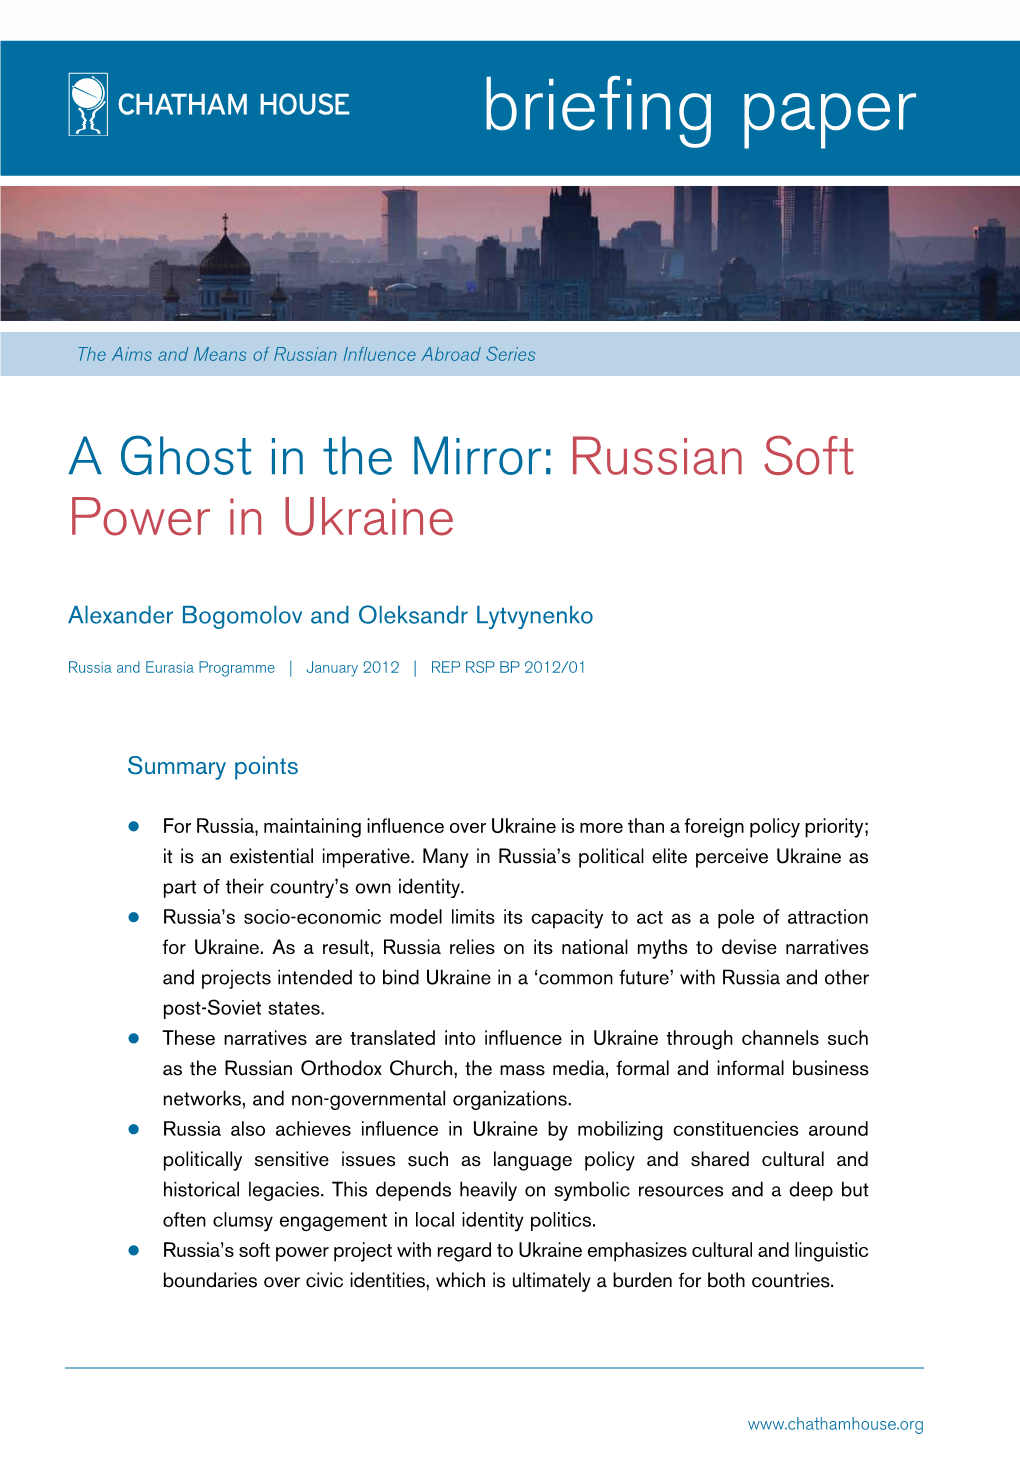 A Ghost in the Mirror: Russian Soft Power in Ukraine